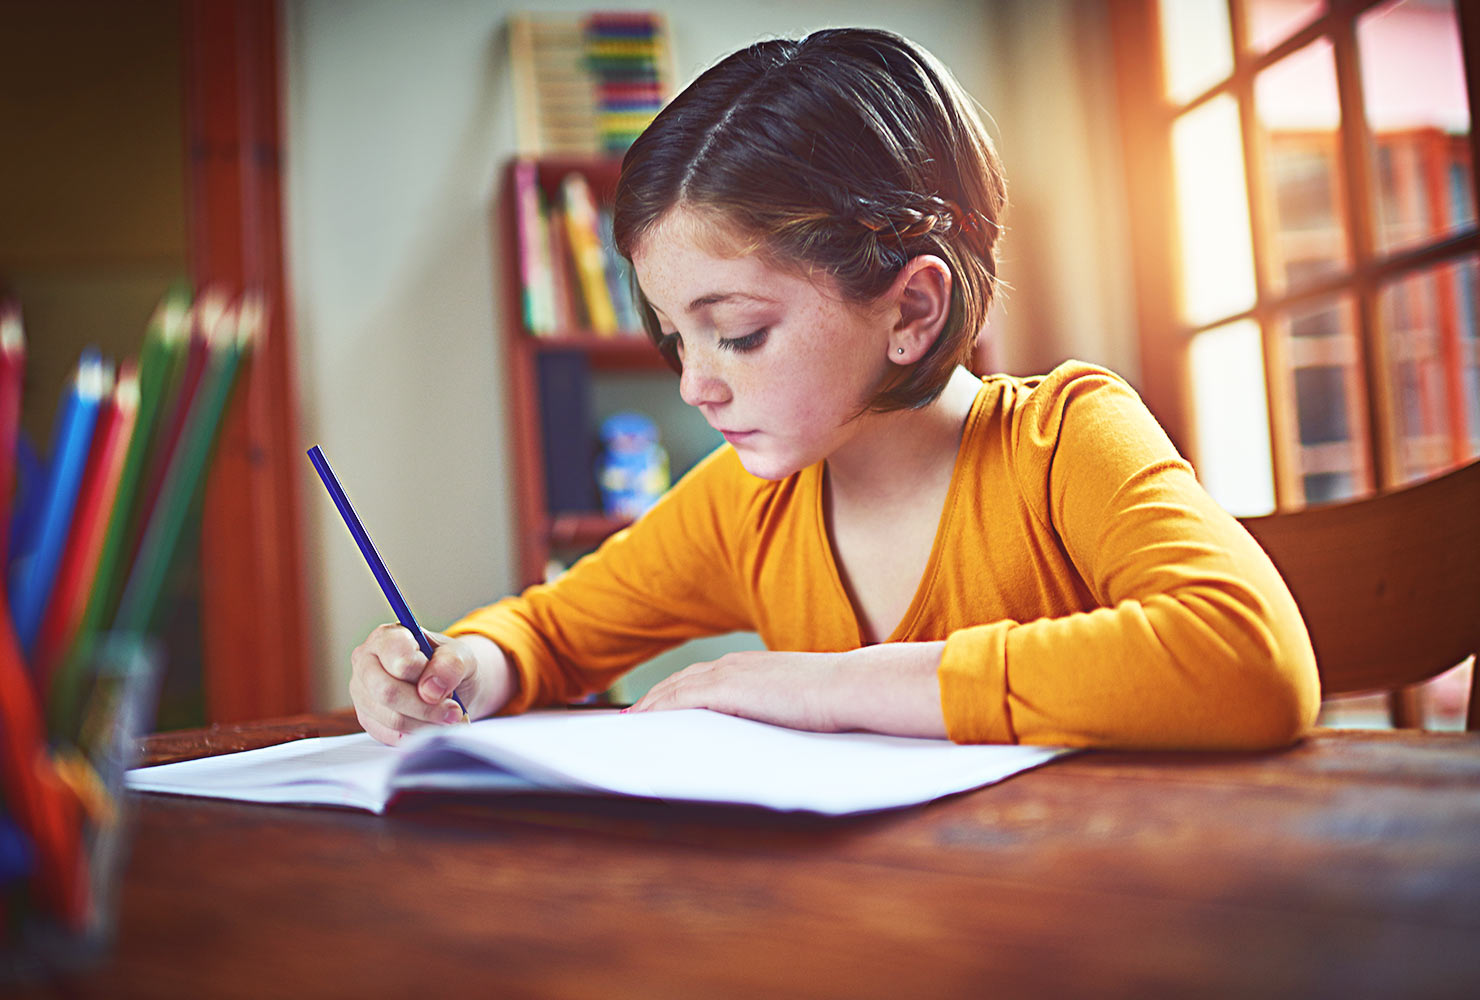 Young girl writing in journal.